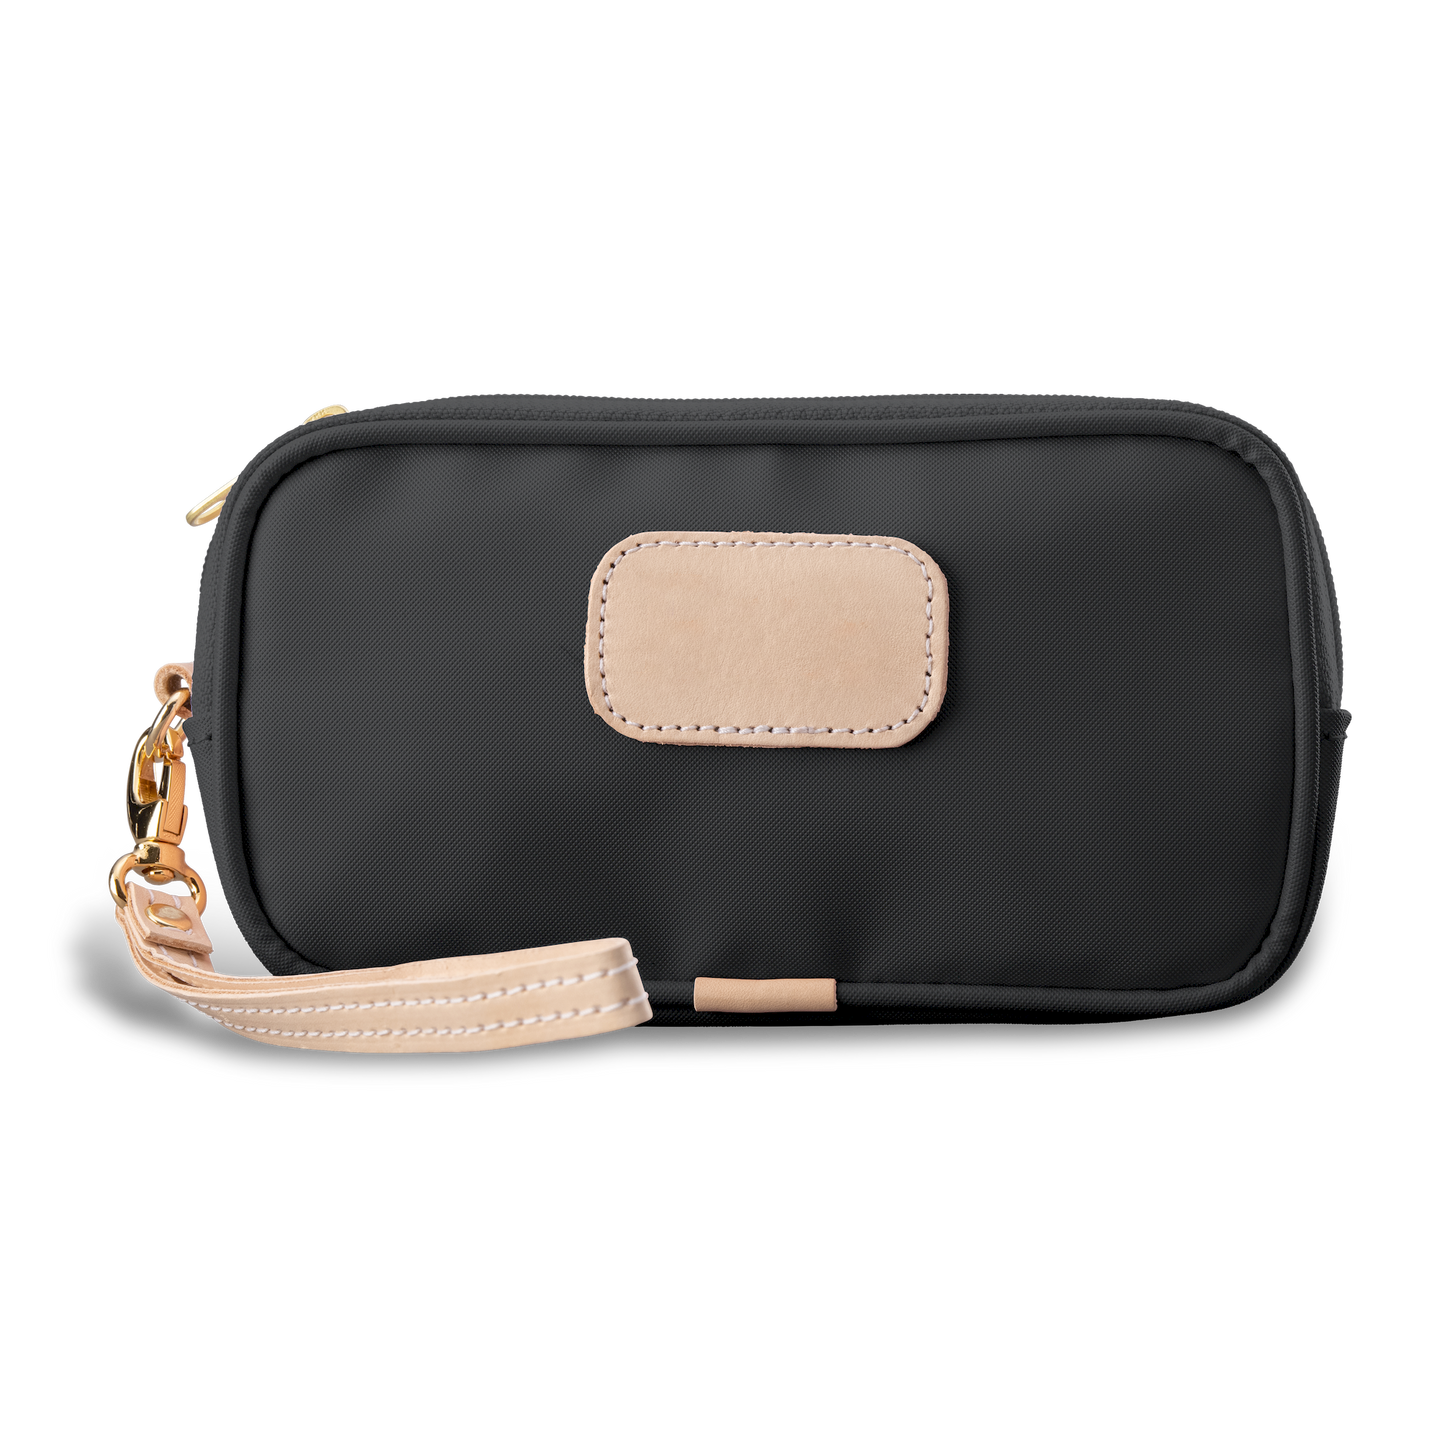 Wristlet - Charcoal Coated Canvas Front Angle in Color 'Charcoal Coated Canvas'